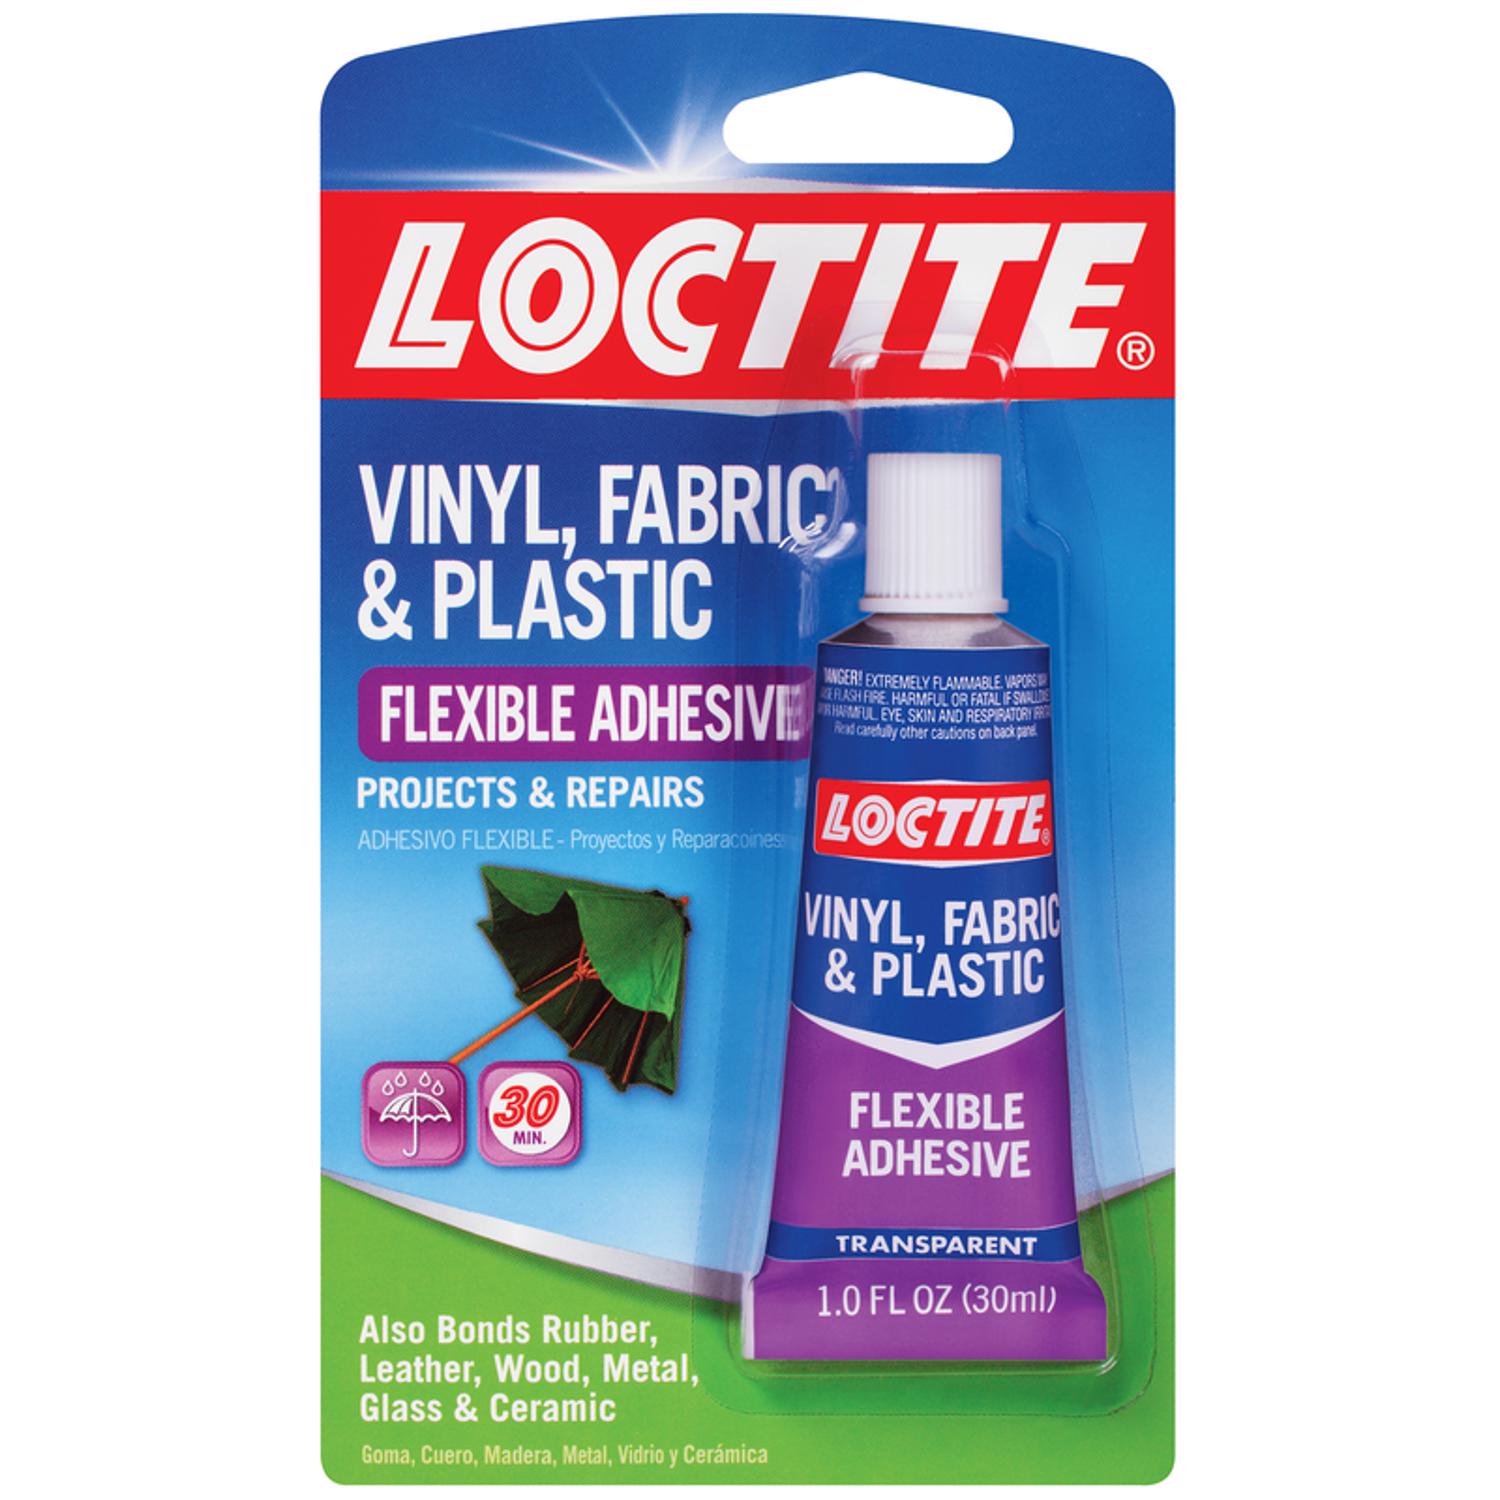 FABRITAC, Specialised glue for fabrics from Beacon Glues - 6